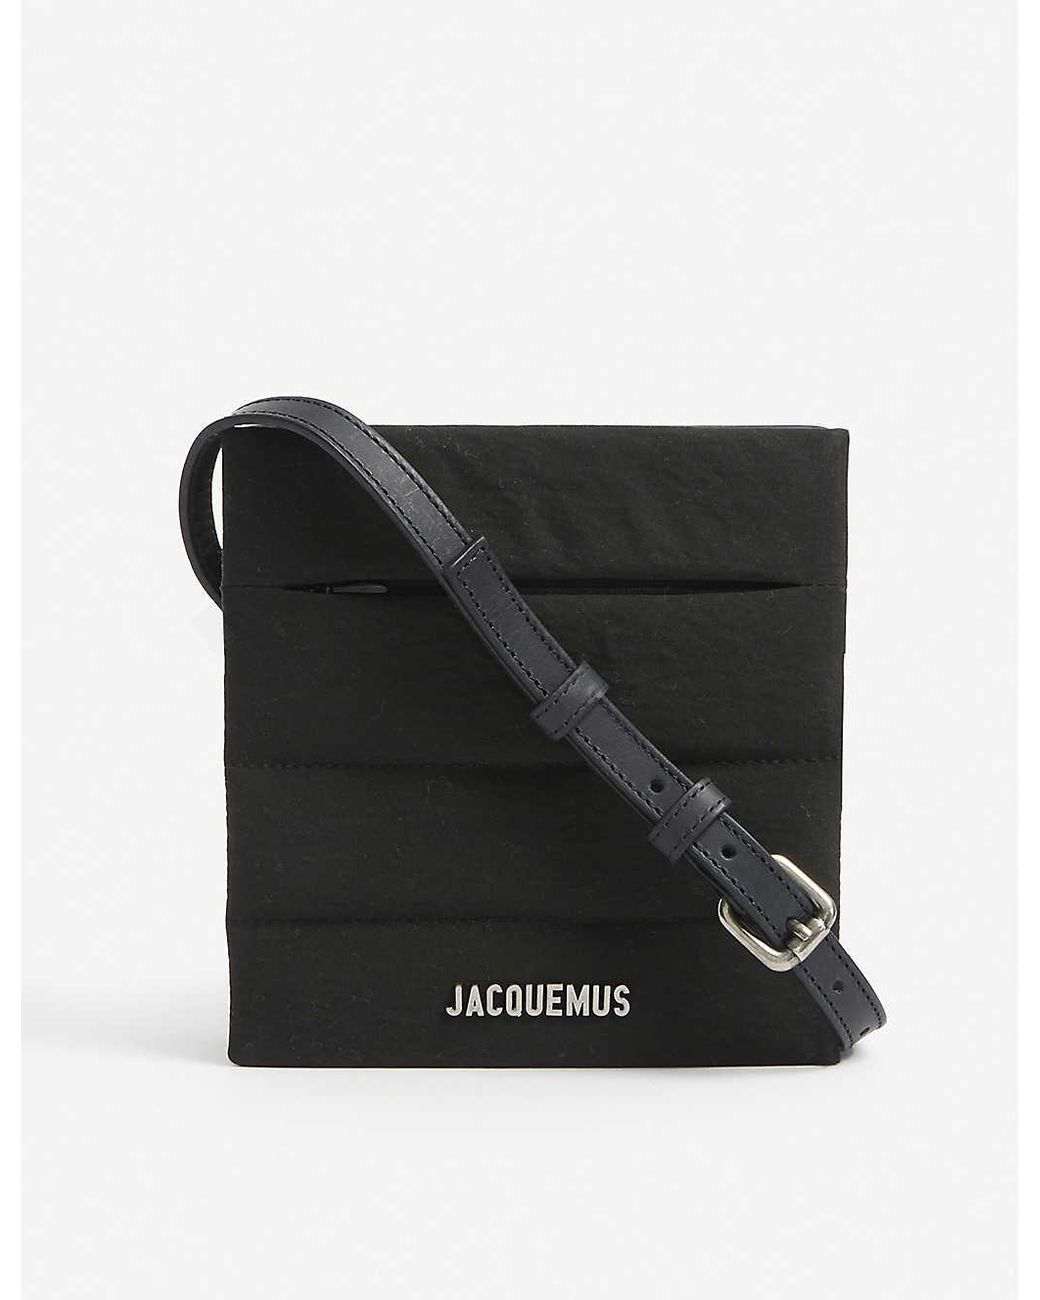 Jacquemus Le Carre Leather Cross-body Bag in Black for Men | Lyst